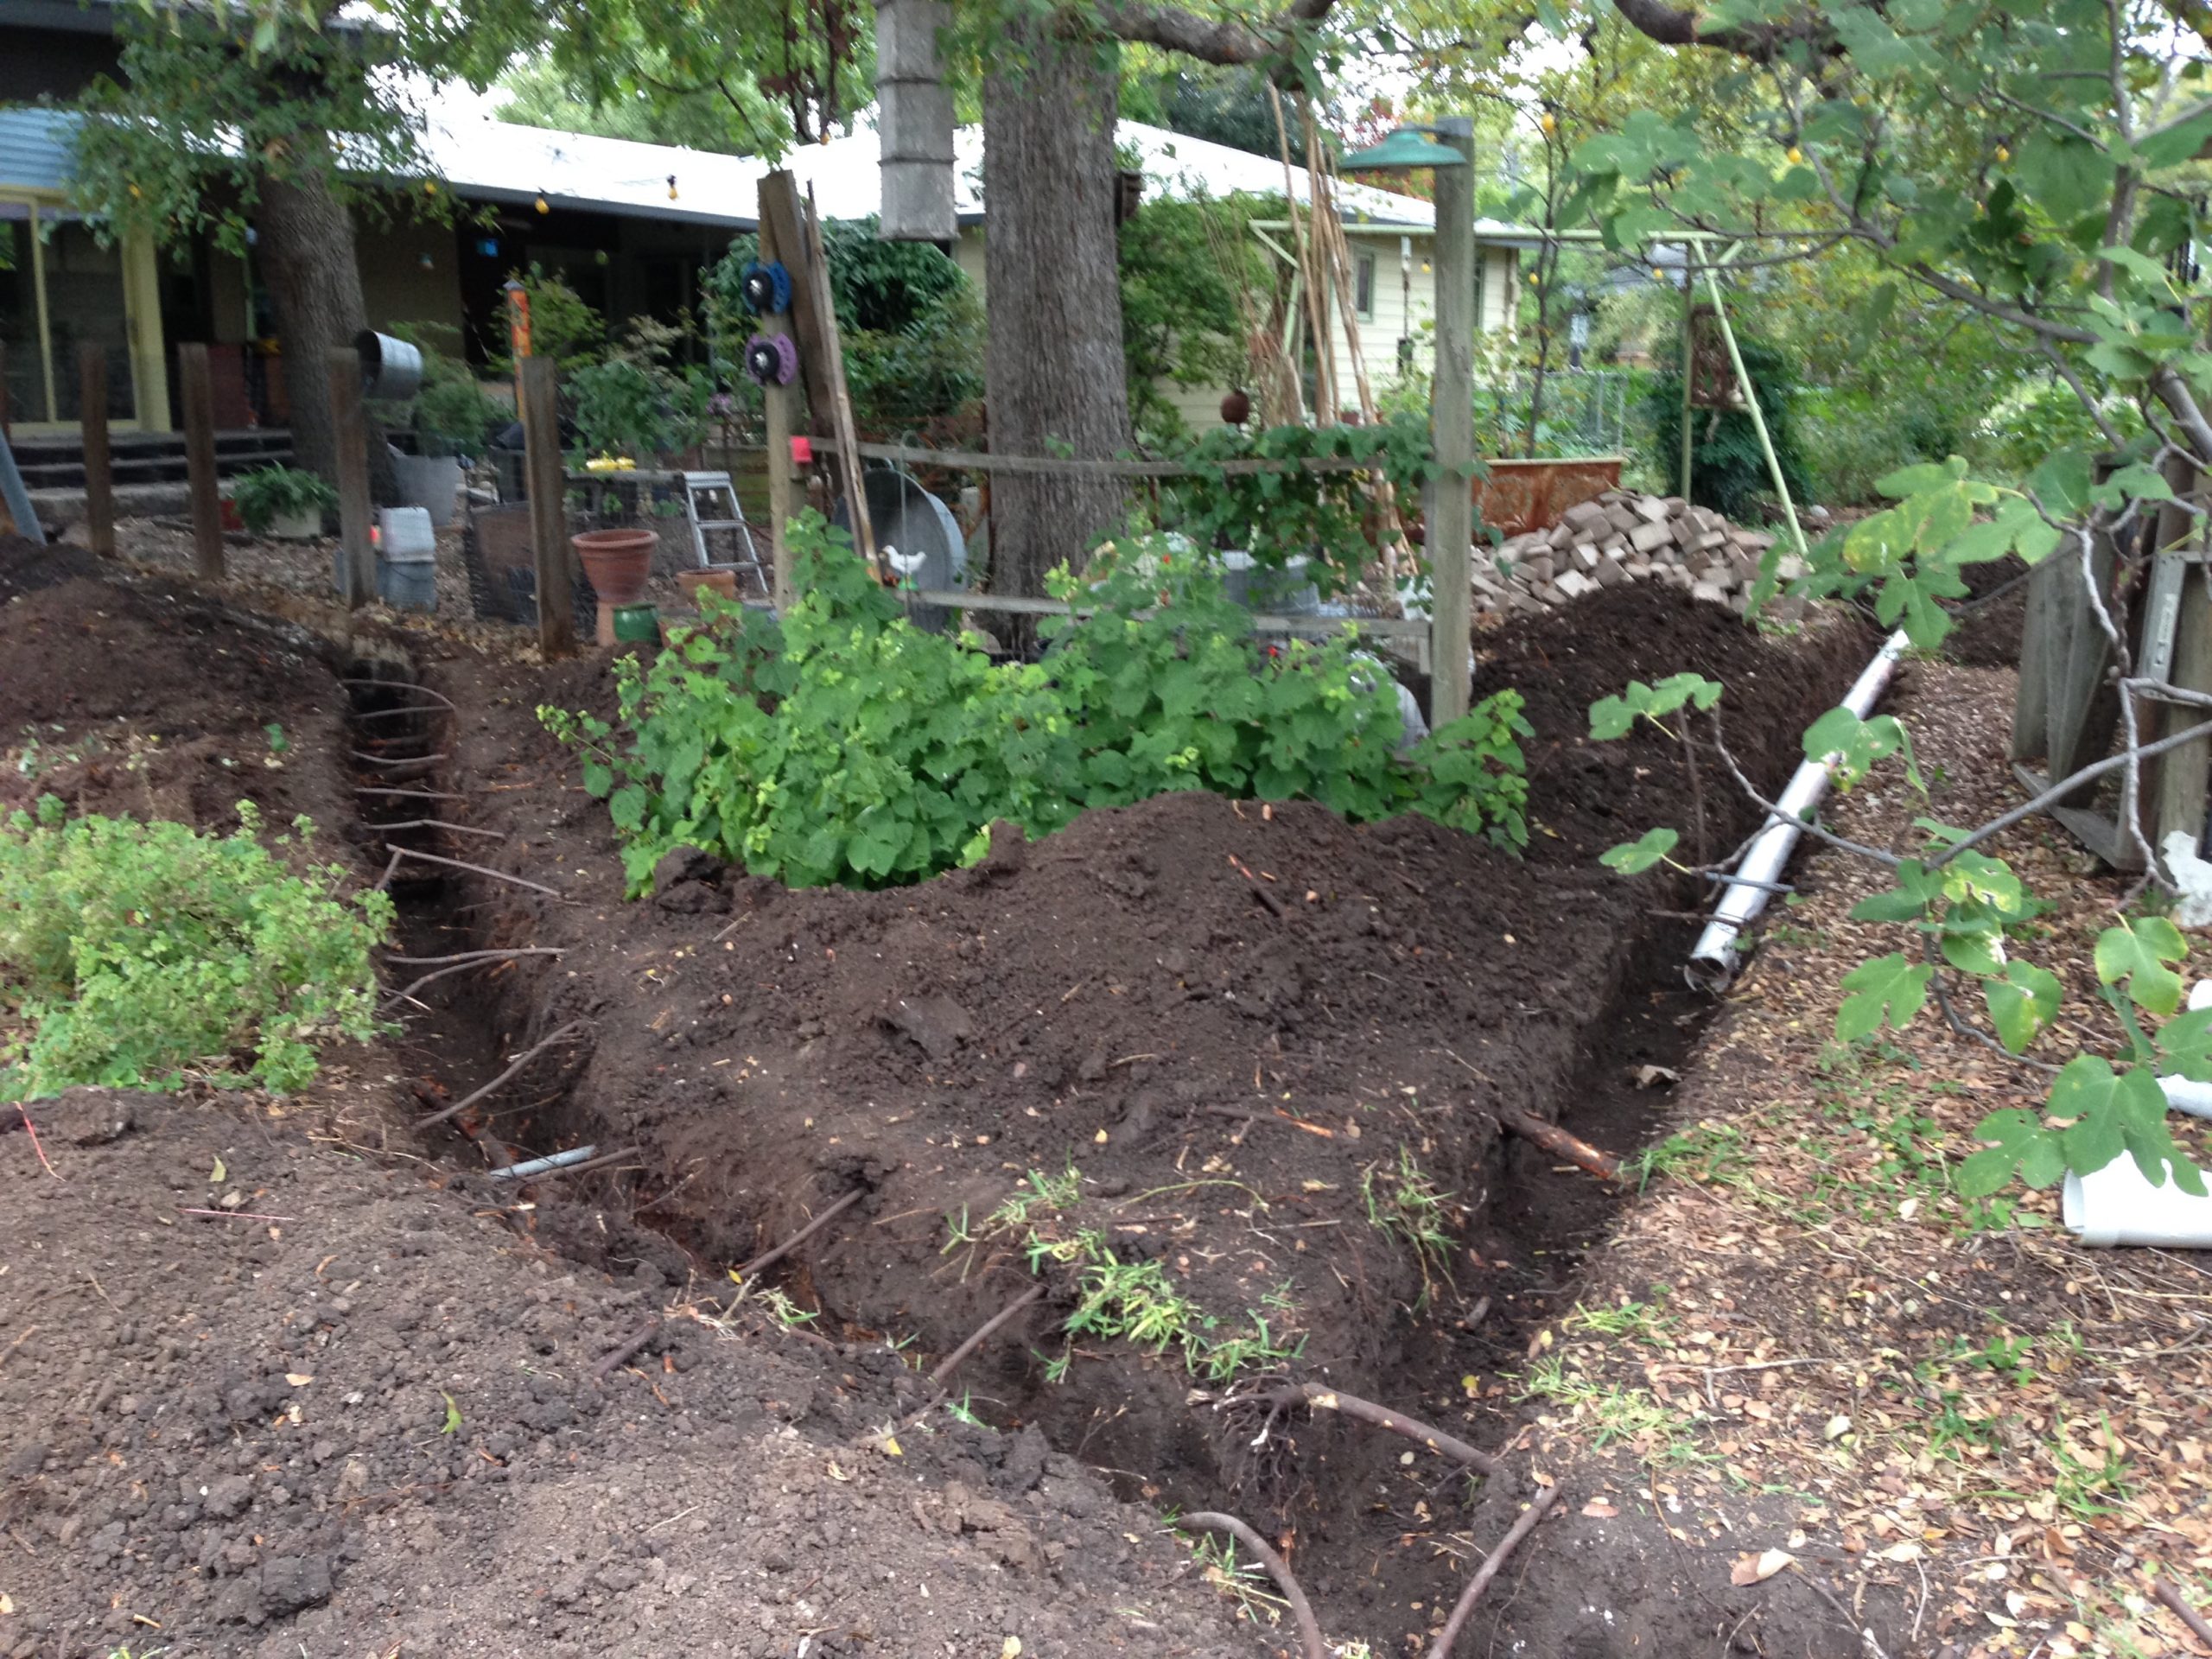 Trenches were dug to lay pvc pipe from the gutters to the rainwater tank.